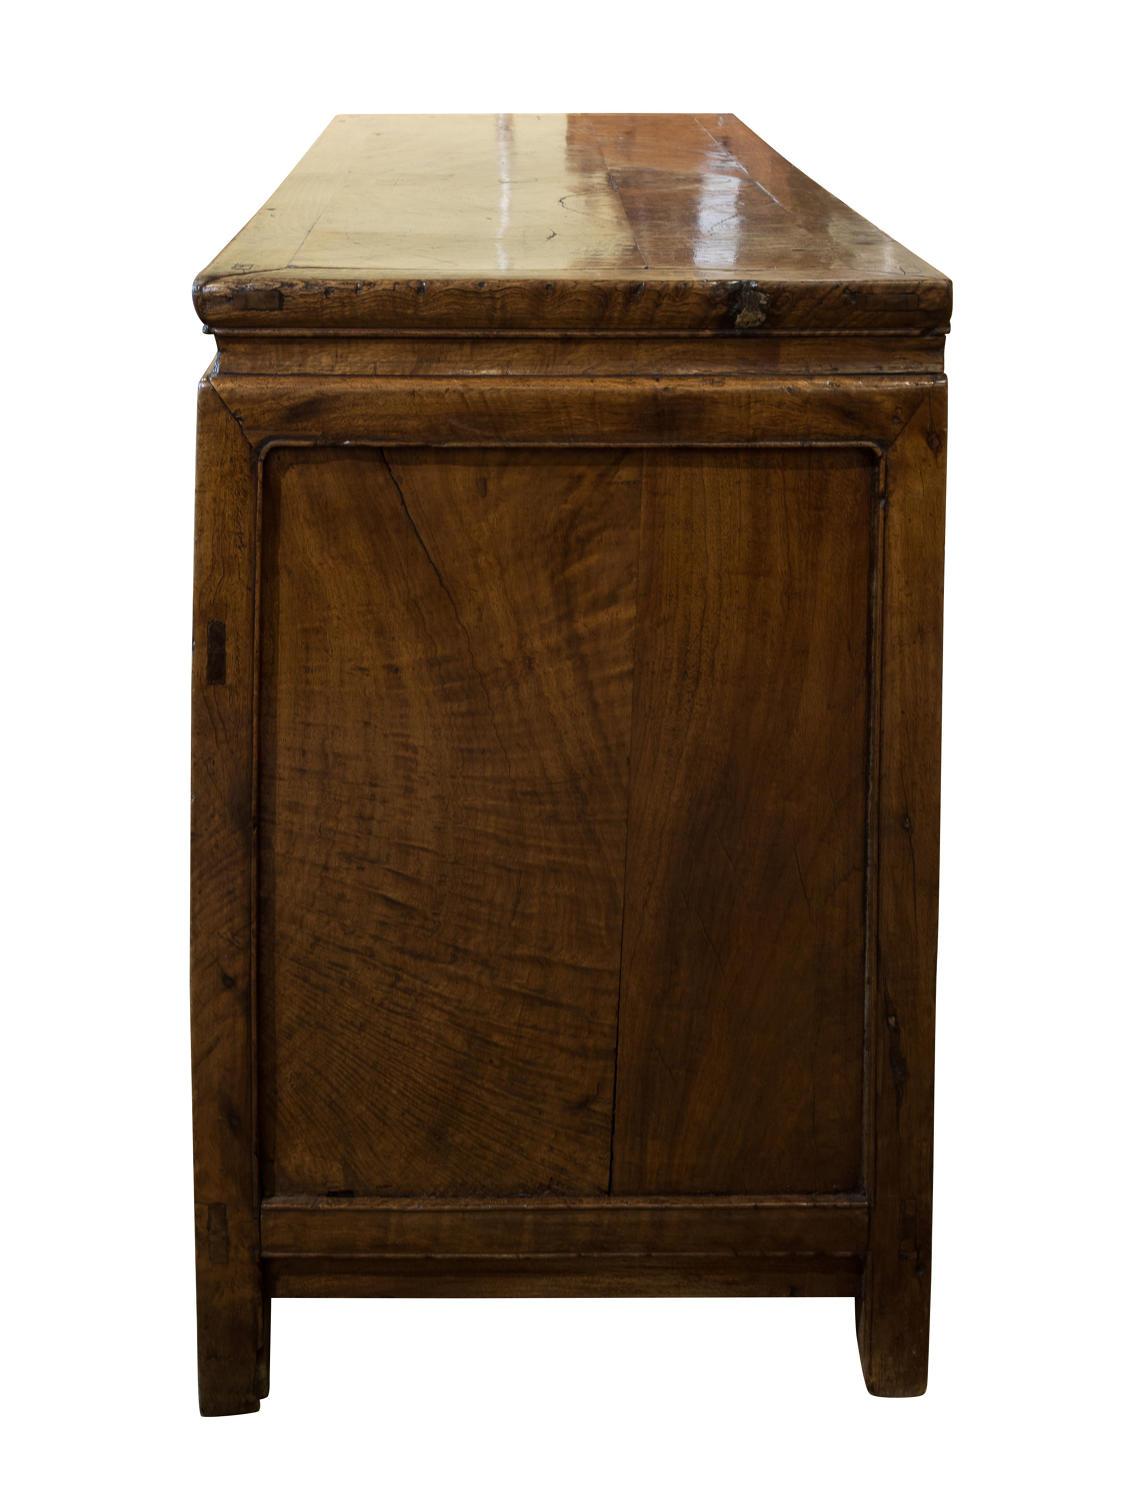 Hardwood Rare Chinese Provincial Cabinet, 17th-18th Century For Sale